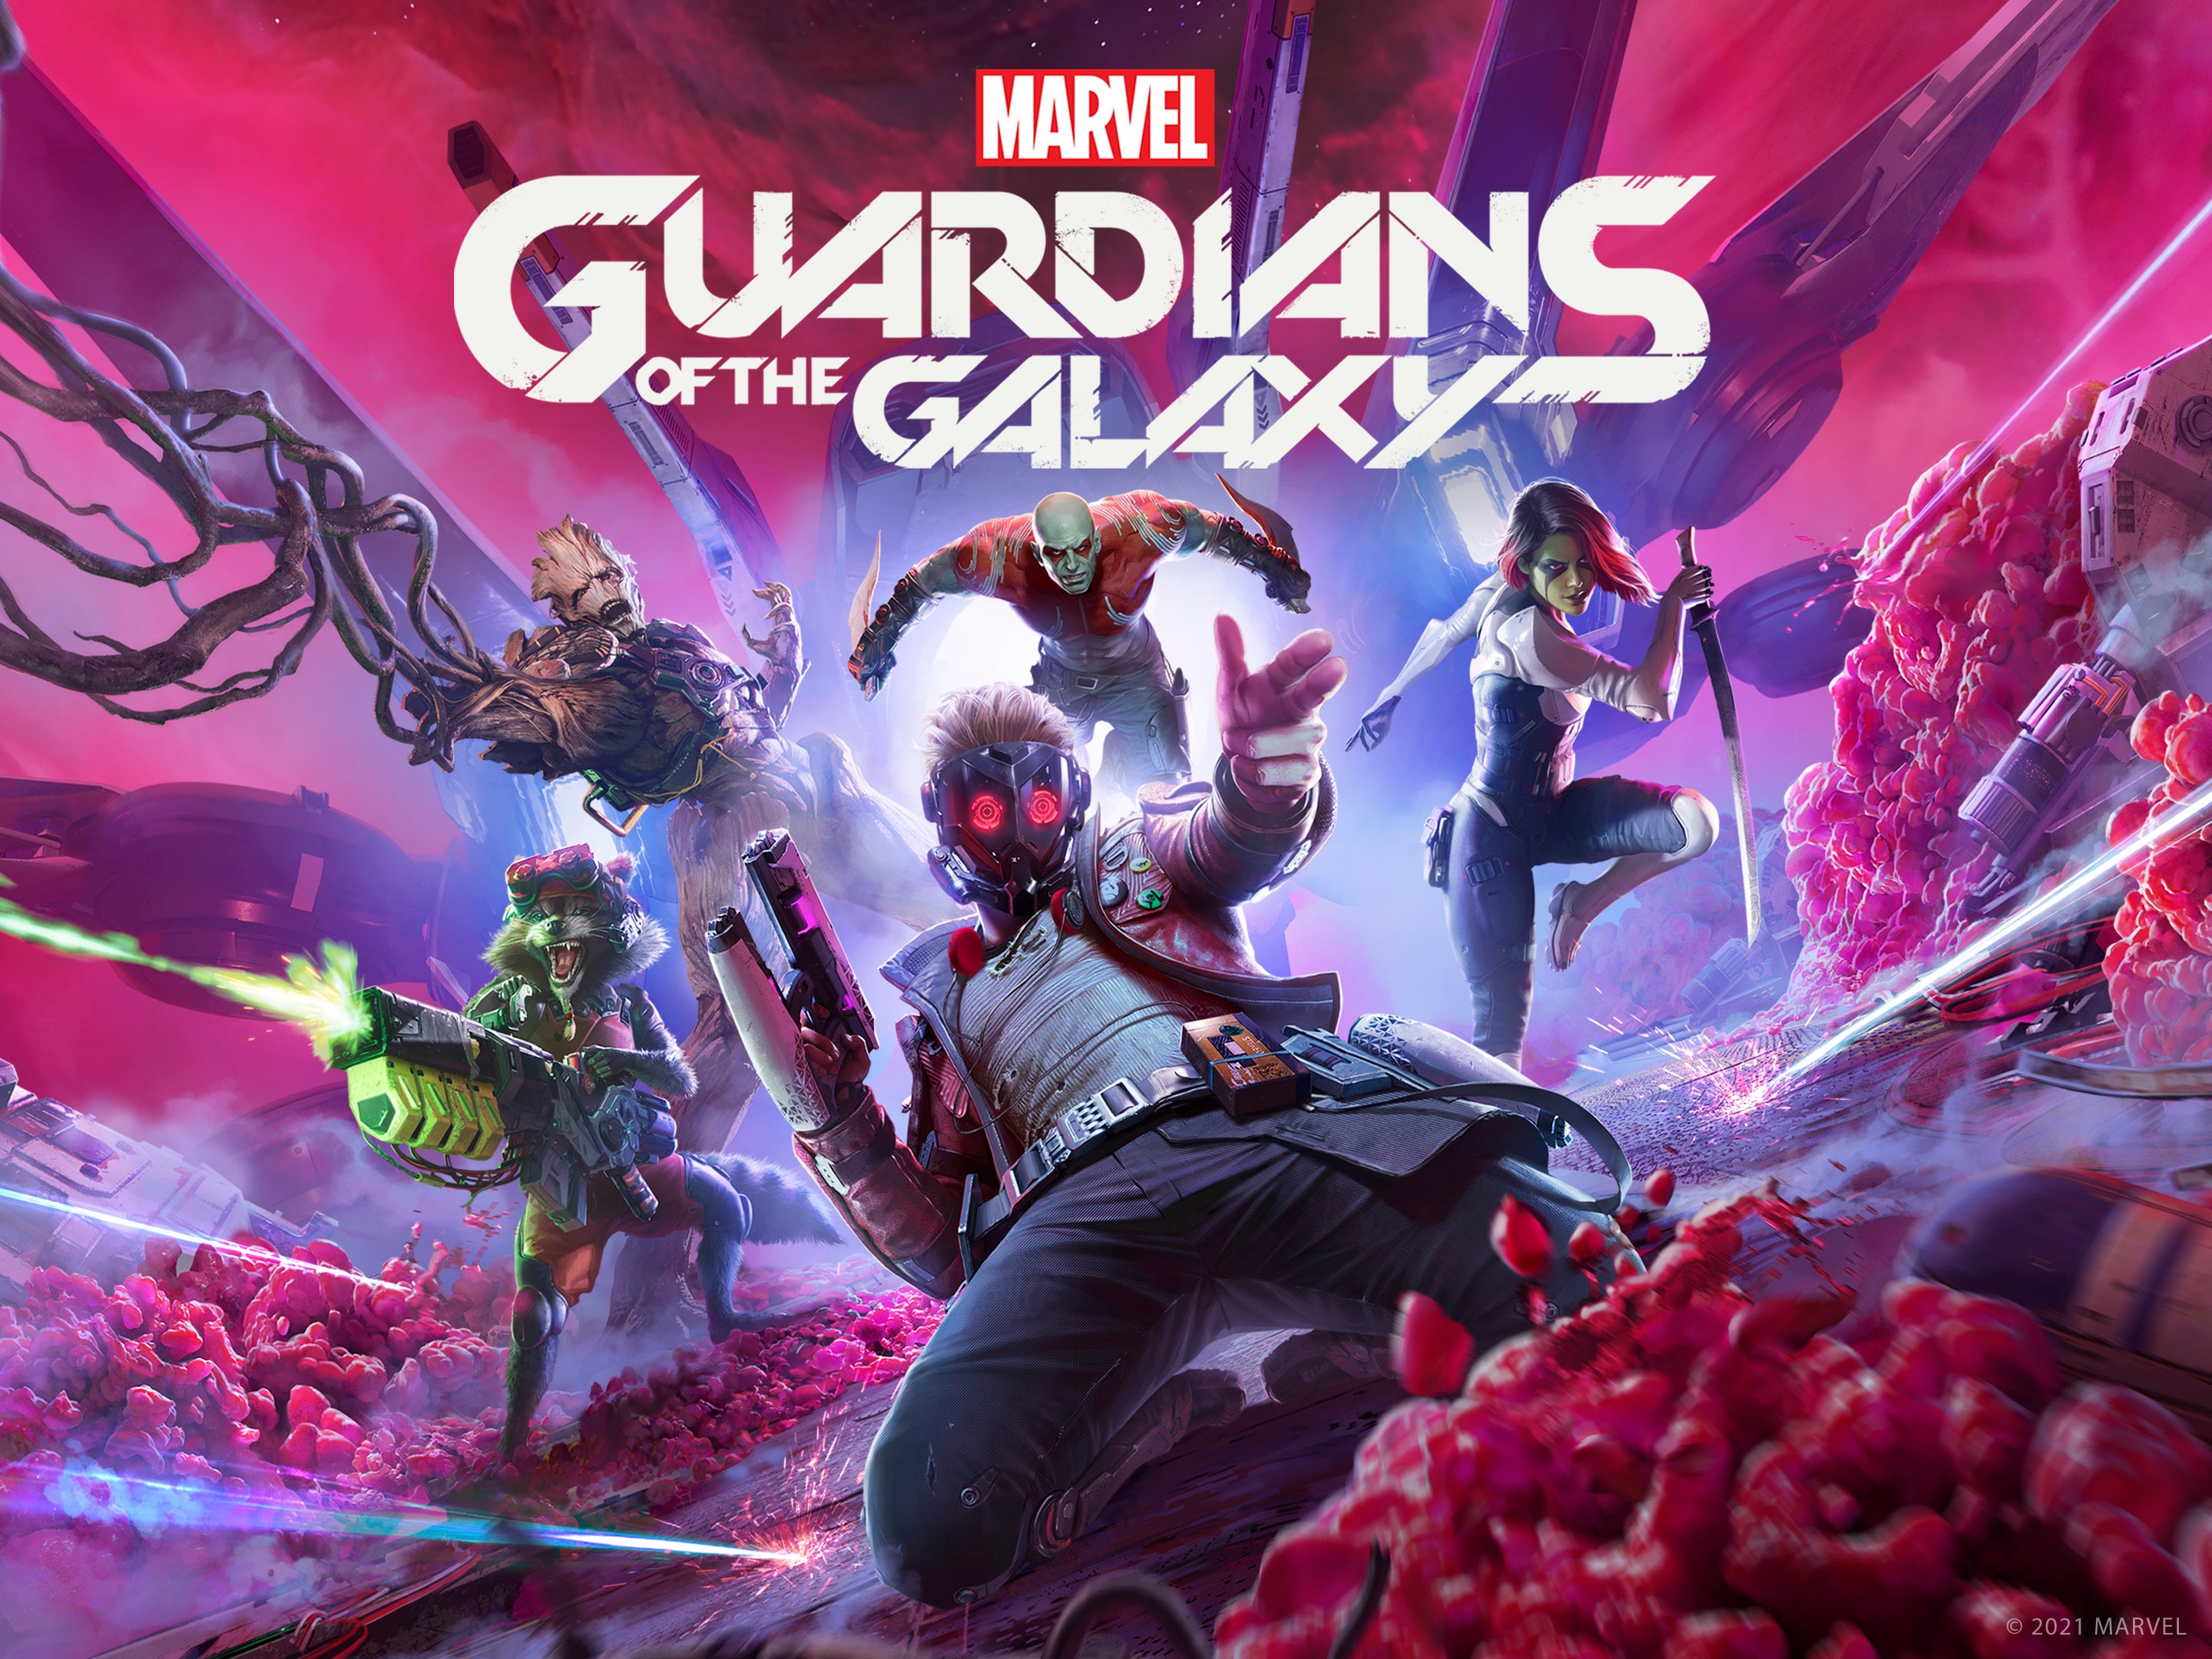 Marvel's Guardians of the Galaxy - PS4 | PlayStation 4 | GameStop